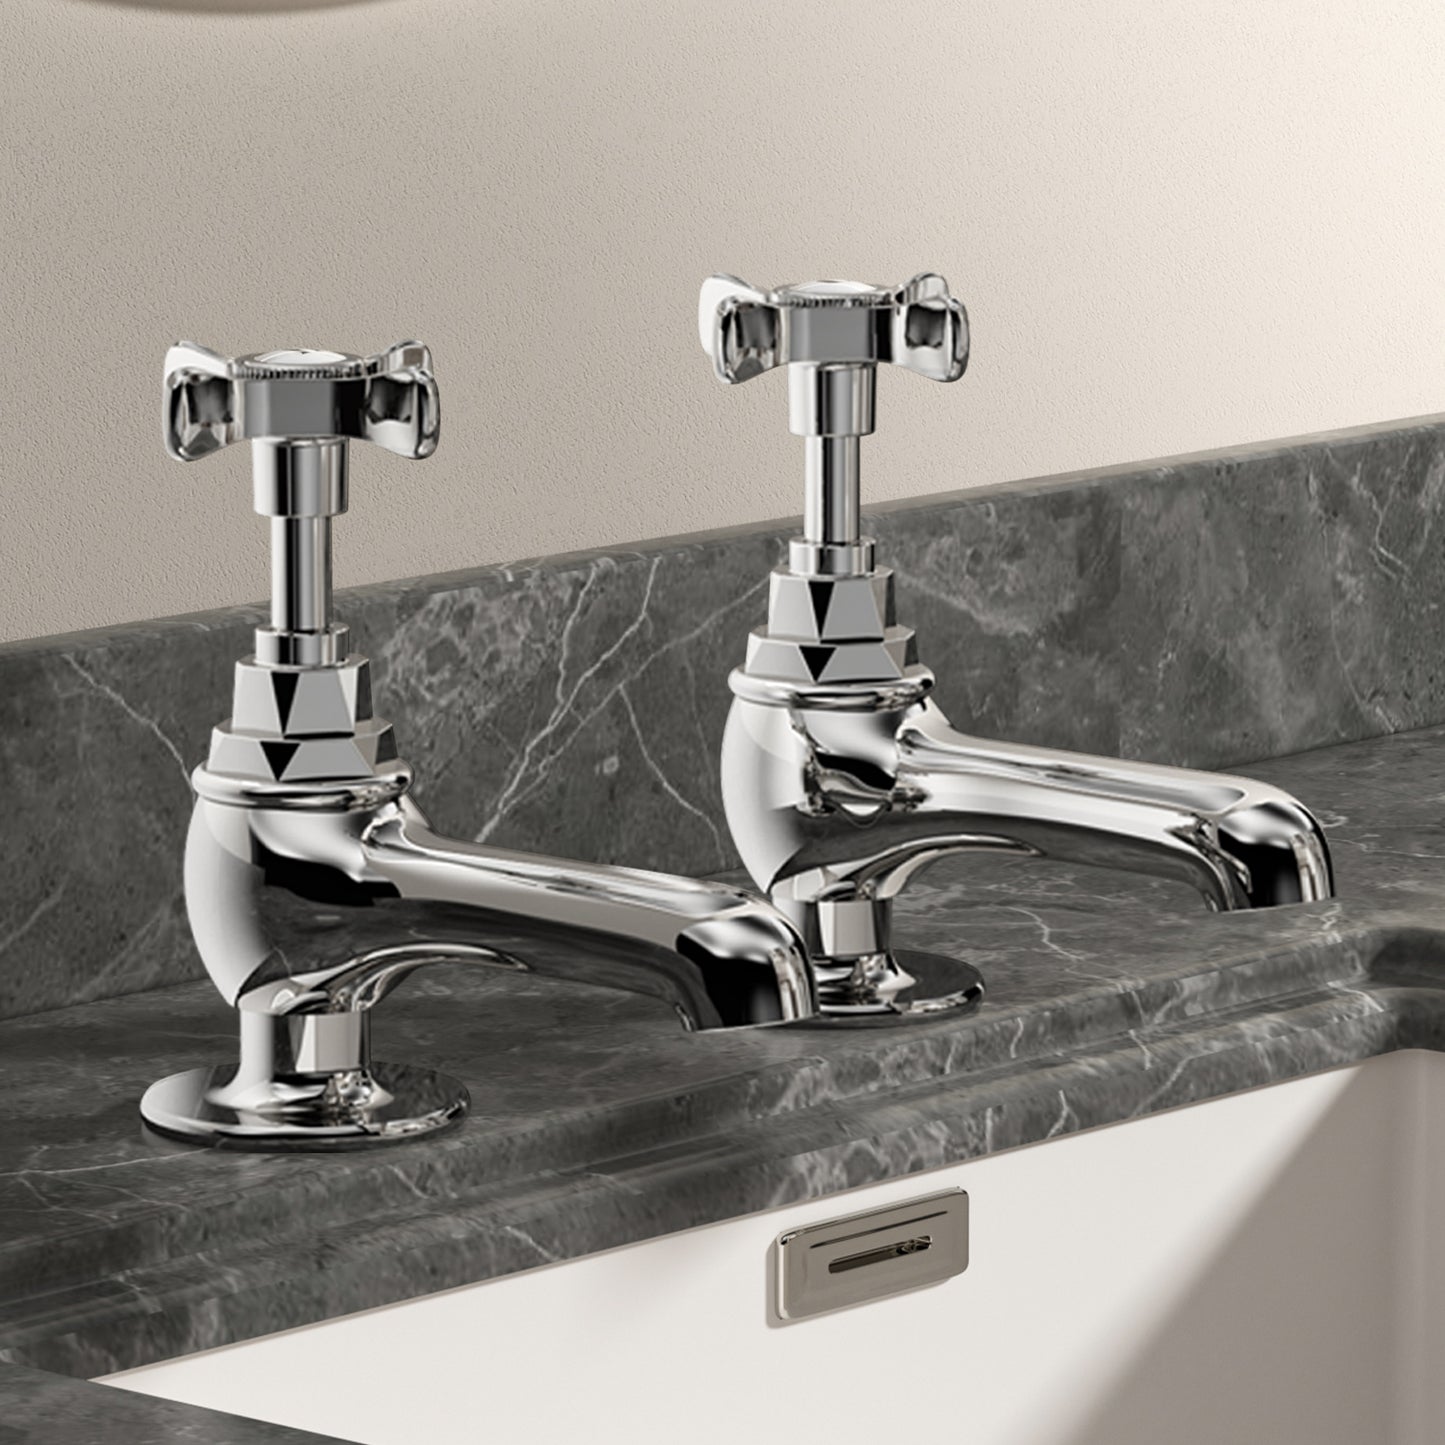 Vancoco Basin Taps Pair Mixers Waterfall Victoria Traditional Bathroom Sink Taps Mixer in Pair Classic Cross Lever Chrome Brass